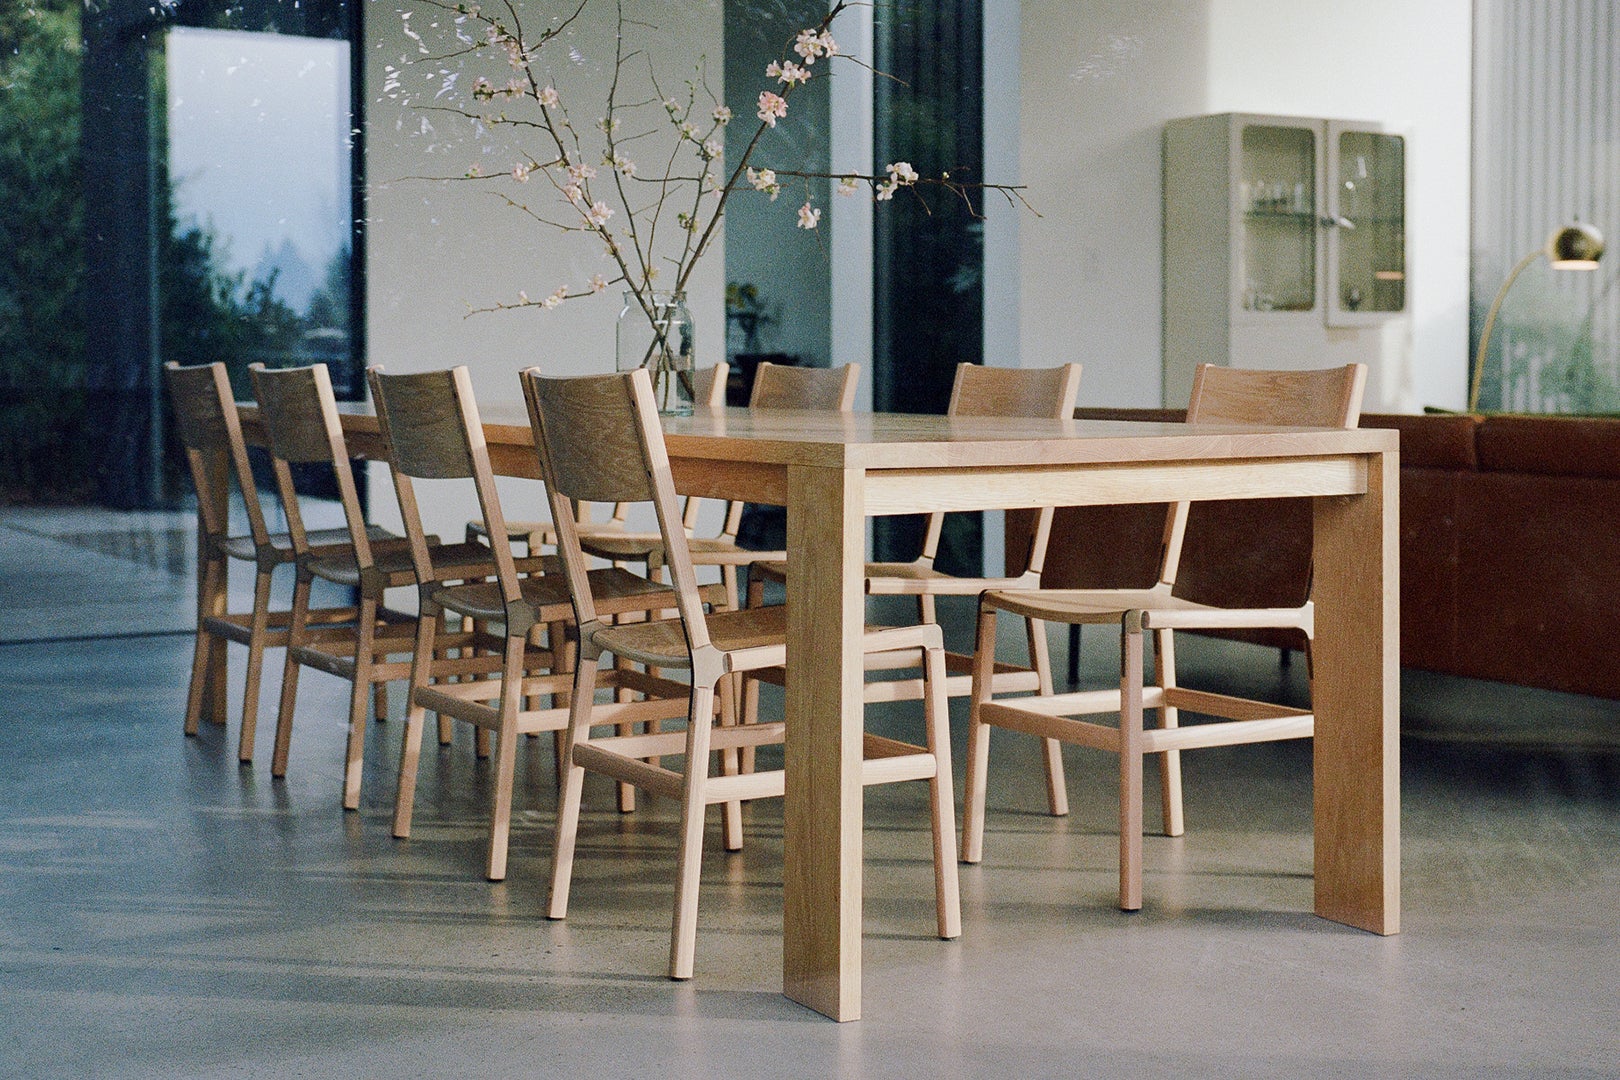 Dining table with wooden Fyrn chairs around it